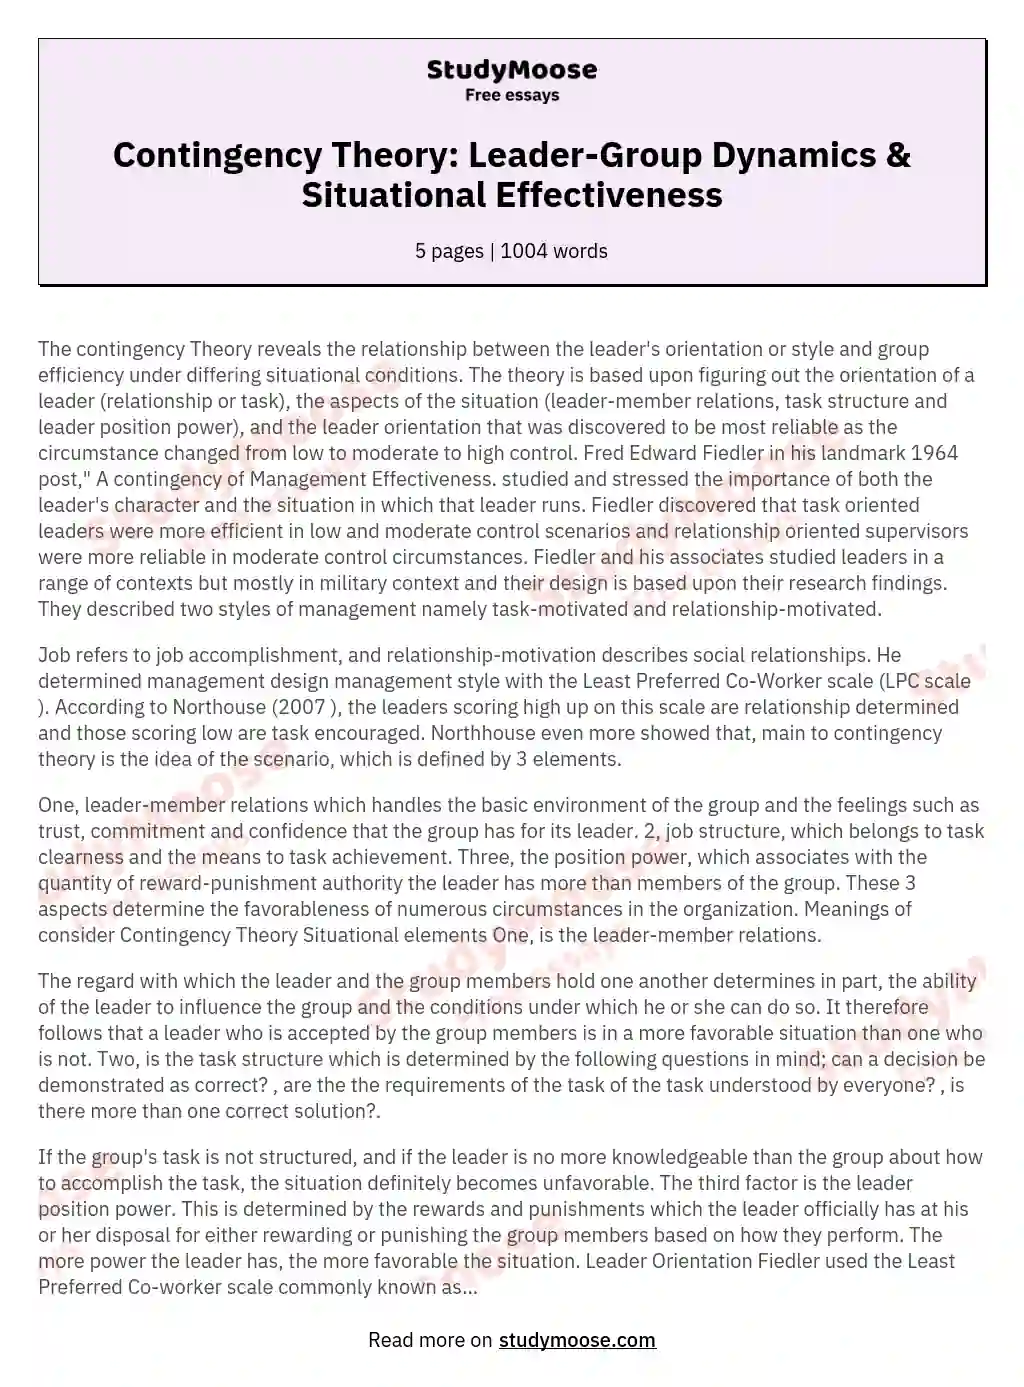 Contingency Theory: Leader-Group Dynamics & Situational Effectiveness essay